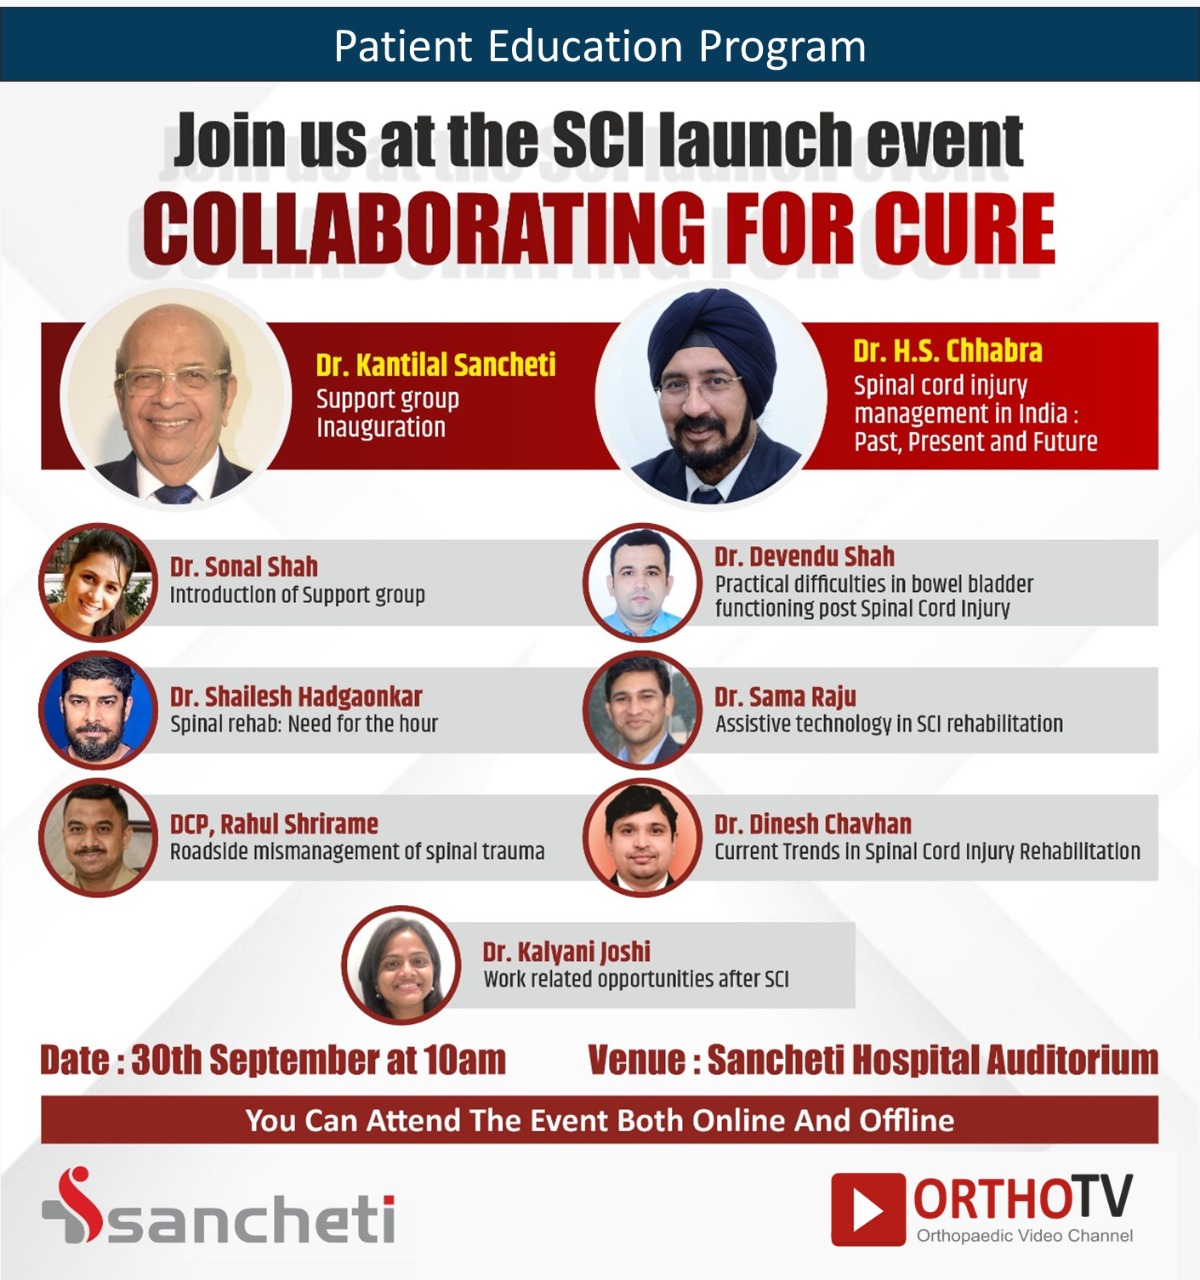 Patient Education Program - Join us at the SCI launch event COLLABORATING FOR CURE